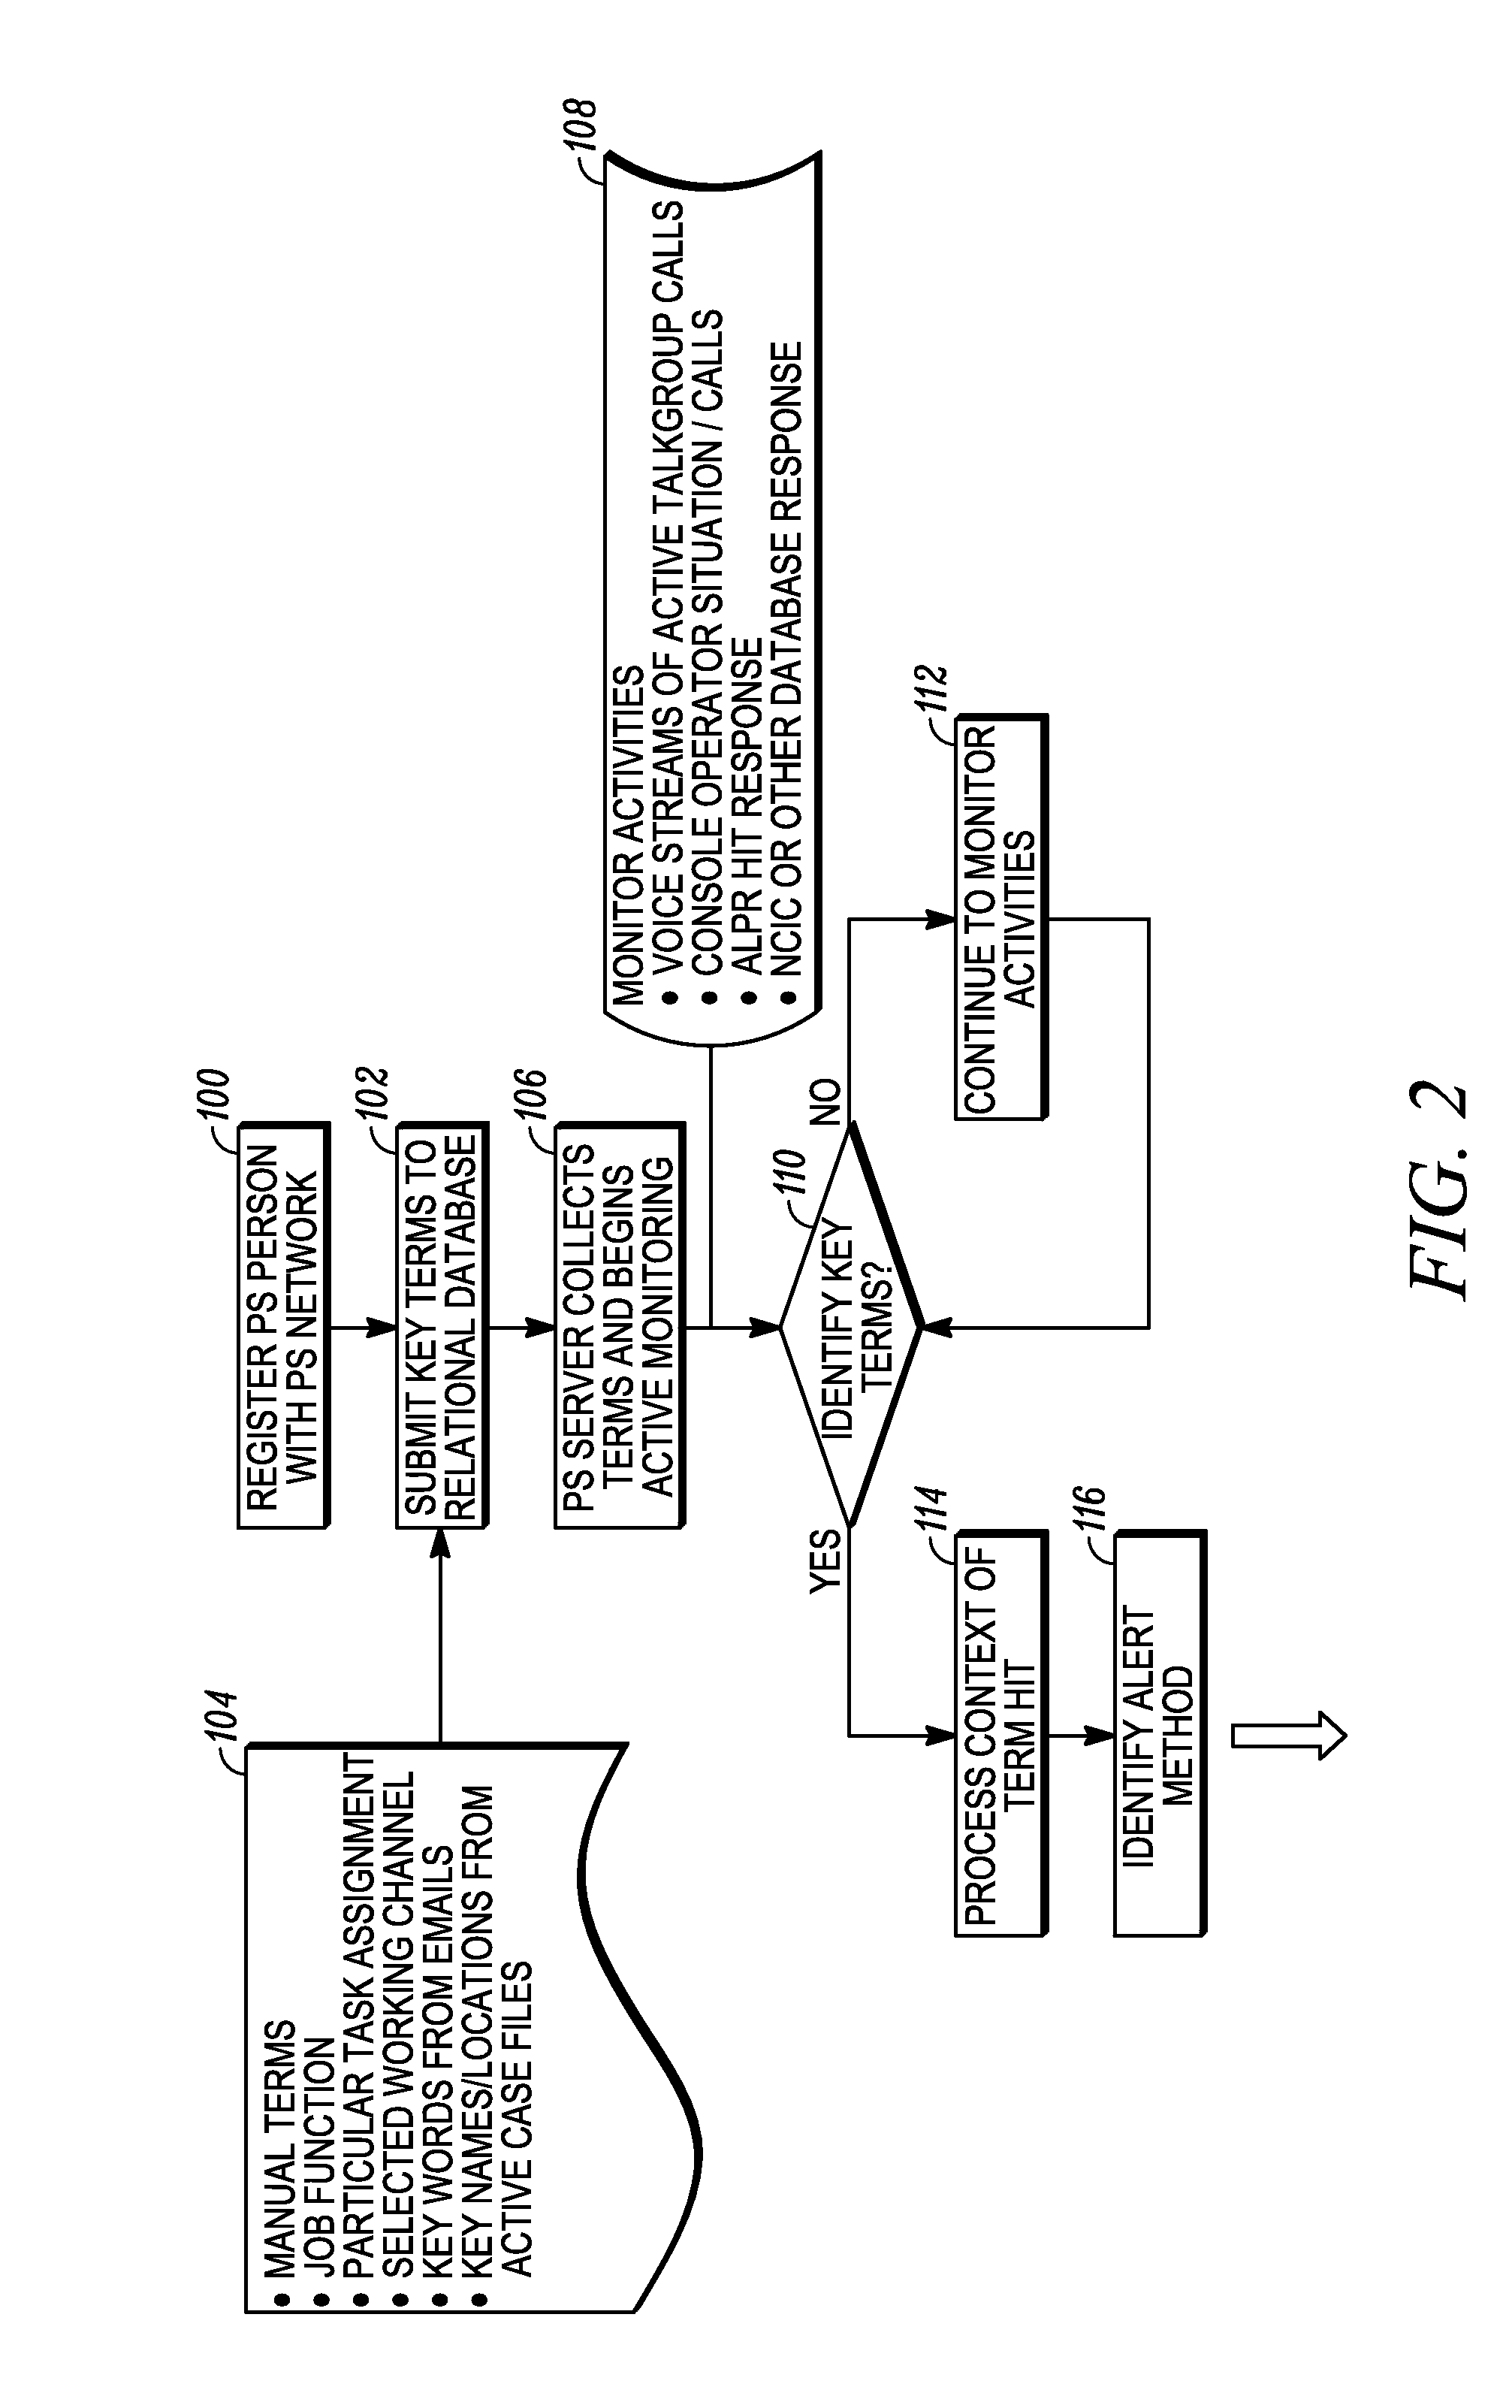 Method of and system for controlling communications over a public safety network